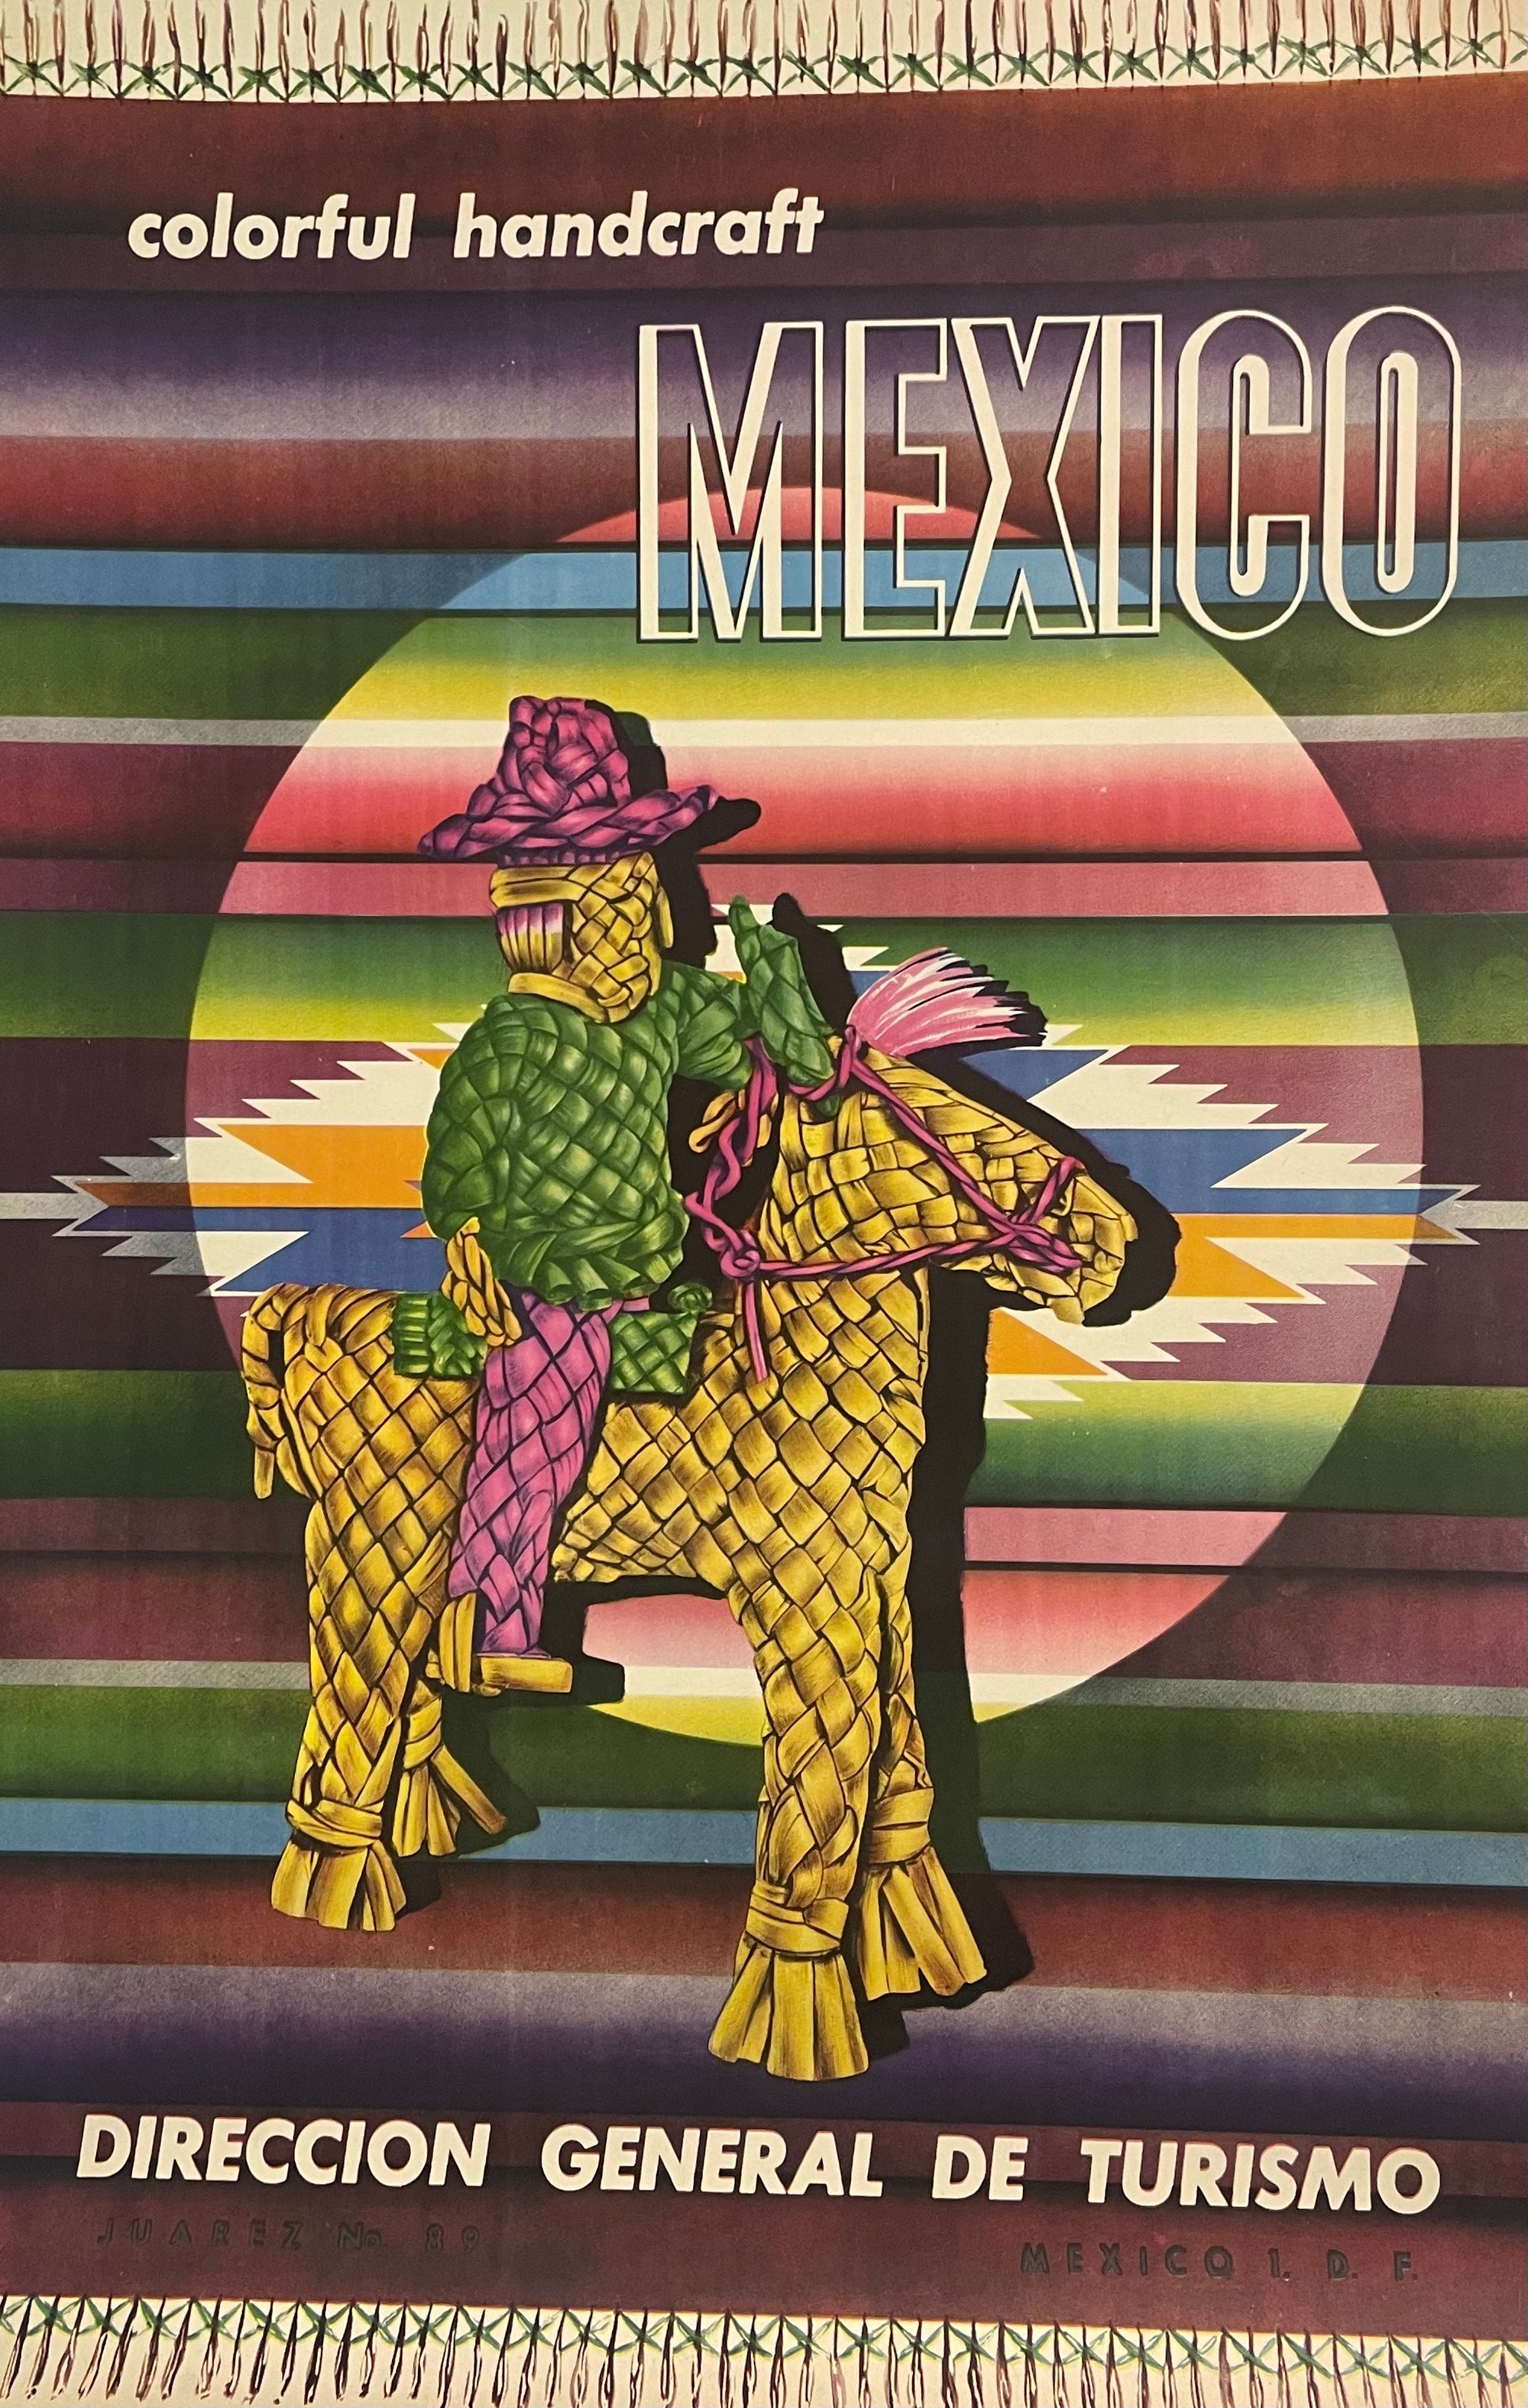 Colorful Handcraft Mexico Vintage Poster